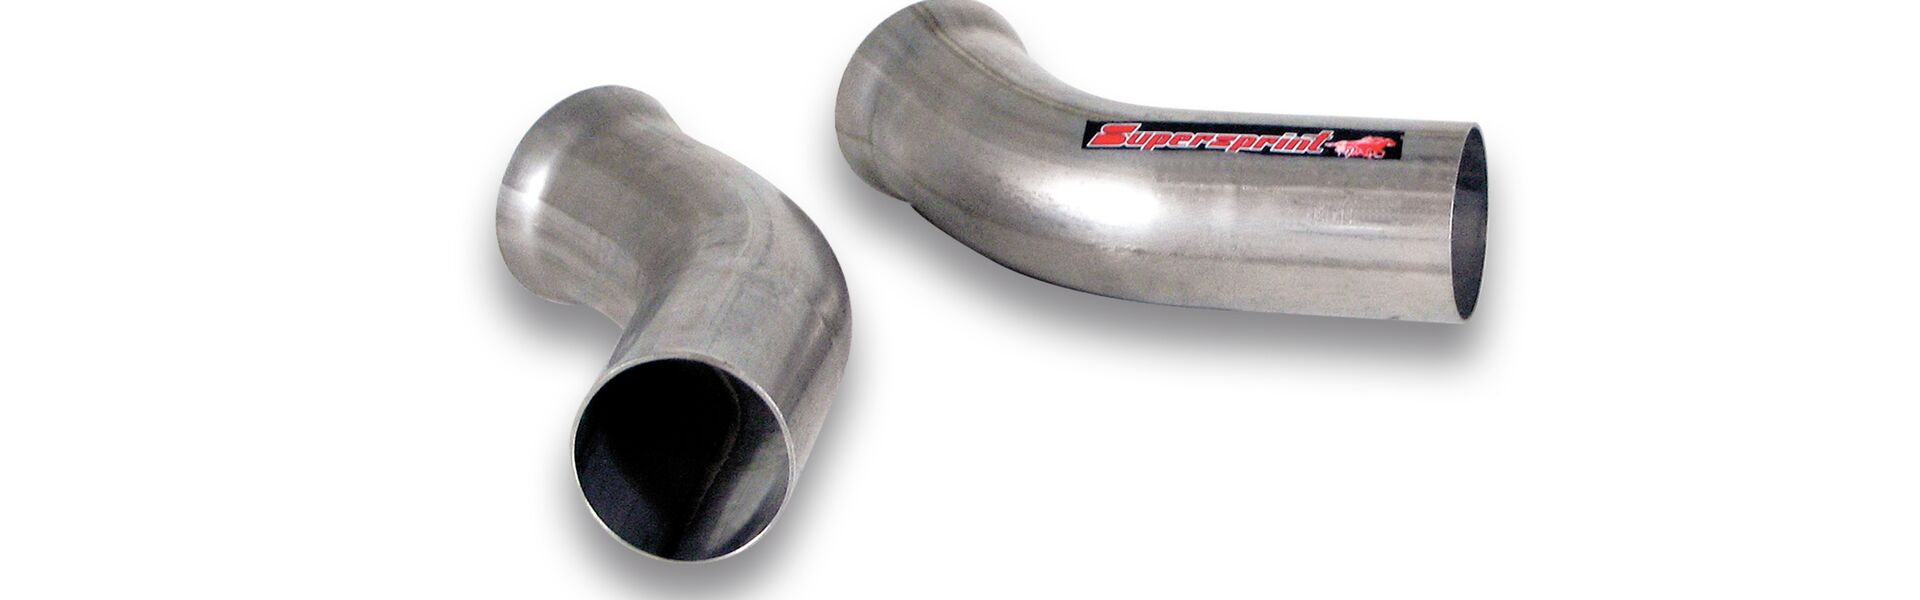 Connecting pipes Kit Supersprint